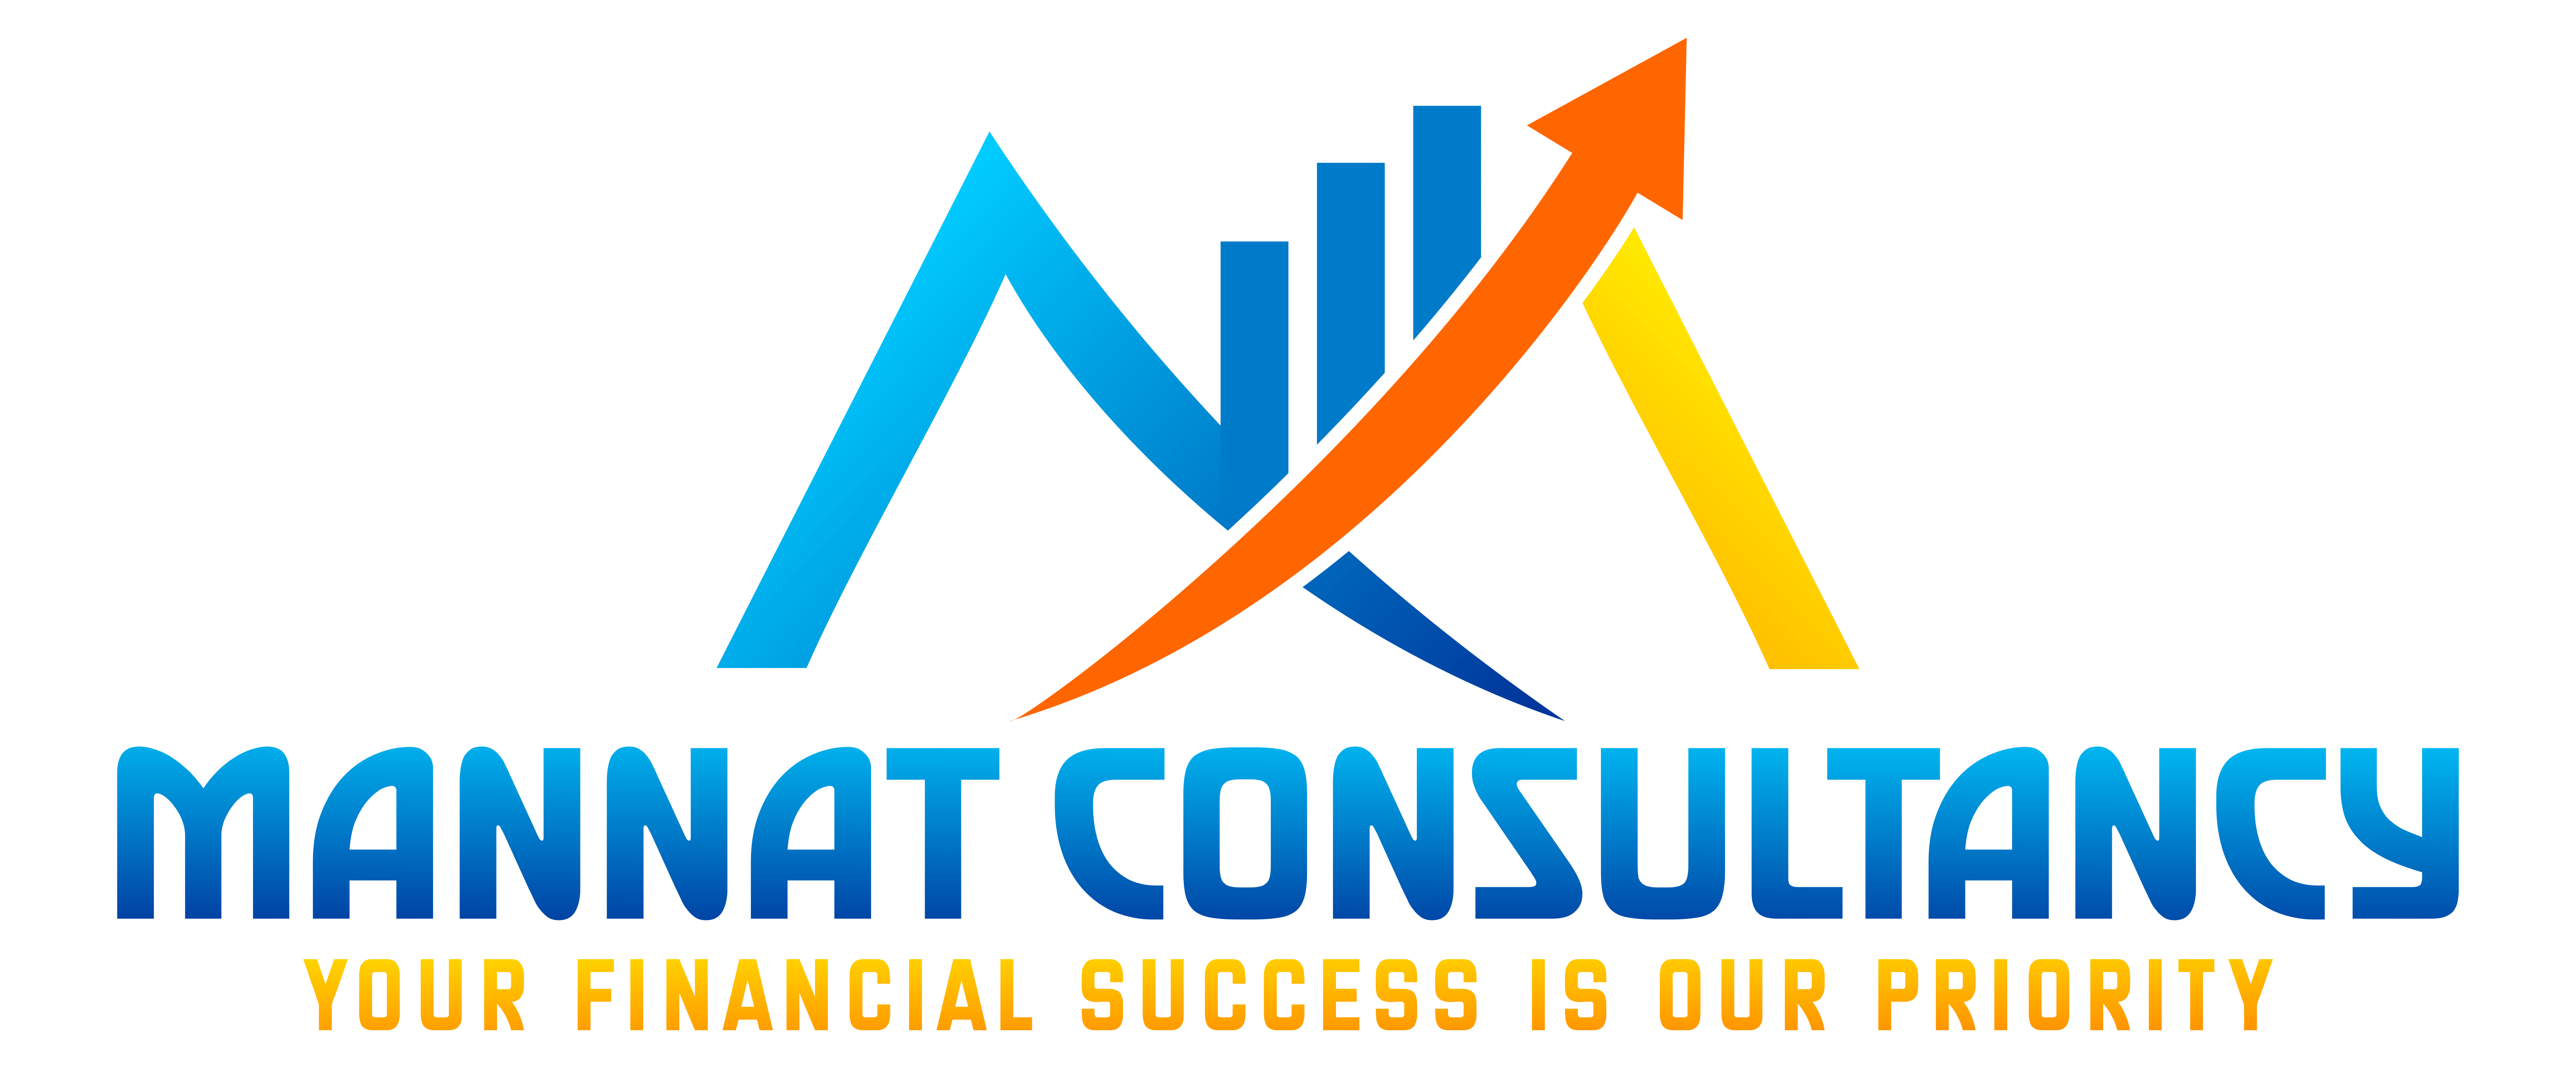 mannatconsultancy.com - Your Financial Success is our Priority